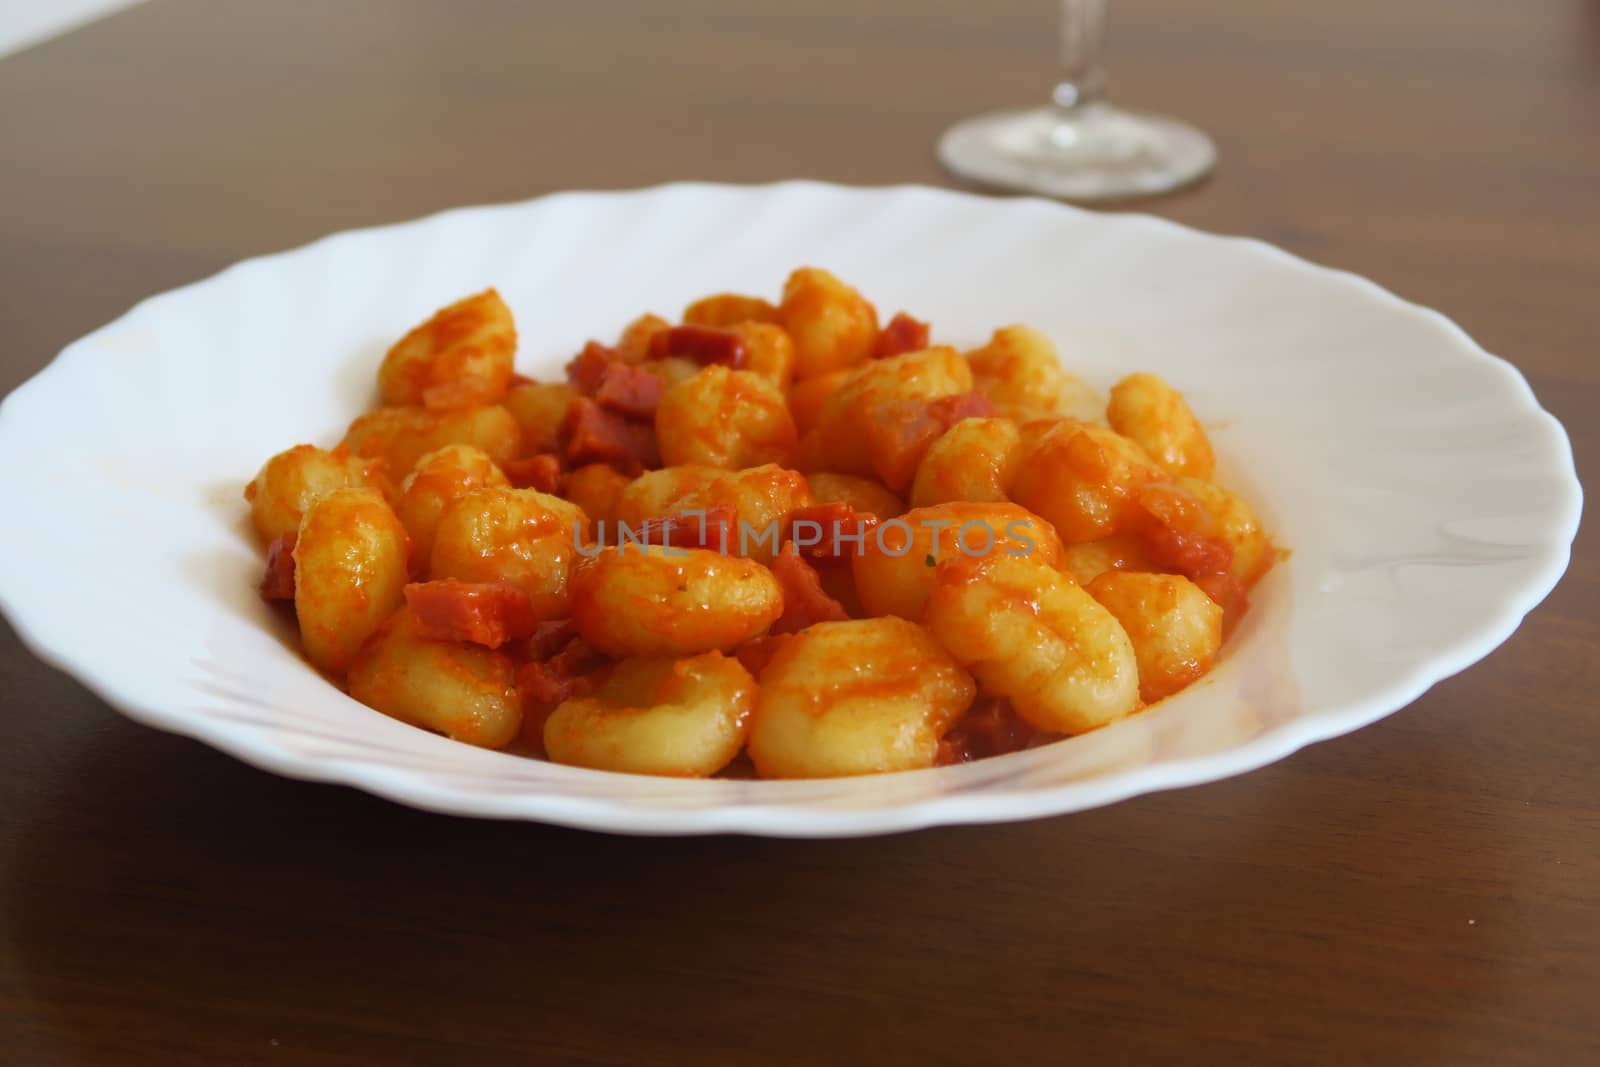 Potato dumplings, a typical Italian pasta called"Gnocchi", here served with tomato sauce and ham